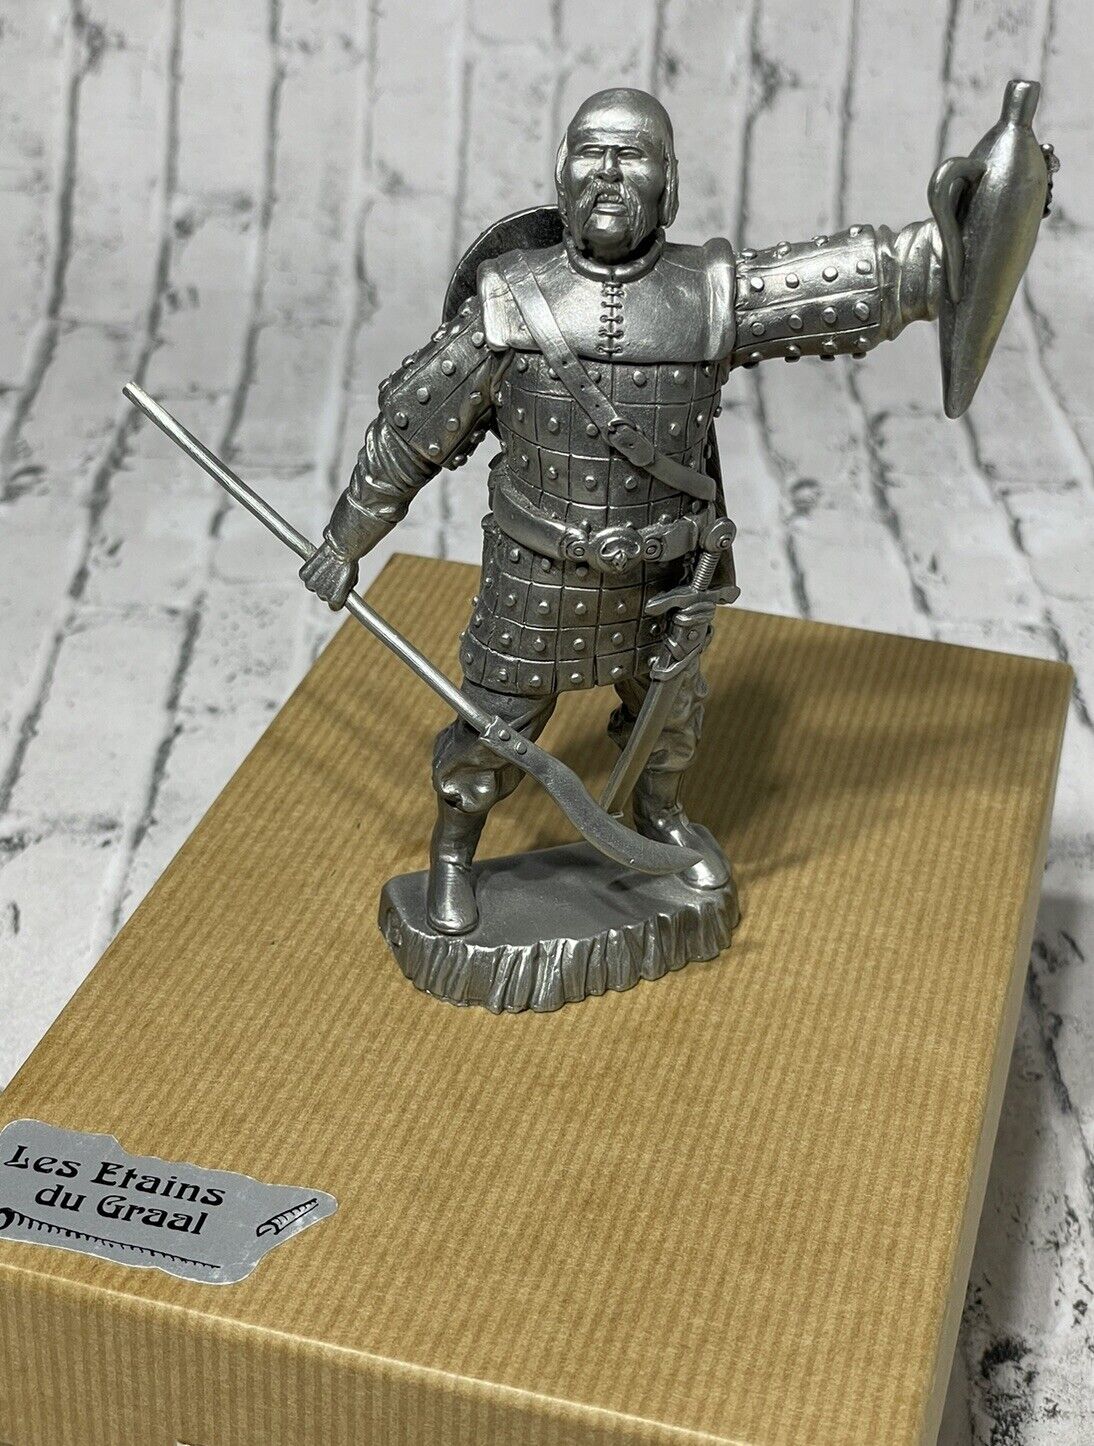 Samourai Warrior Pewter Figurine by Les Etains du Graal Made in France with Box